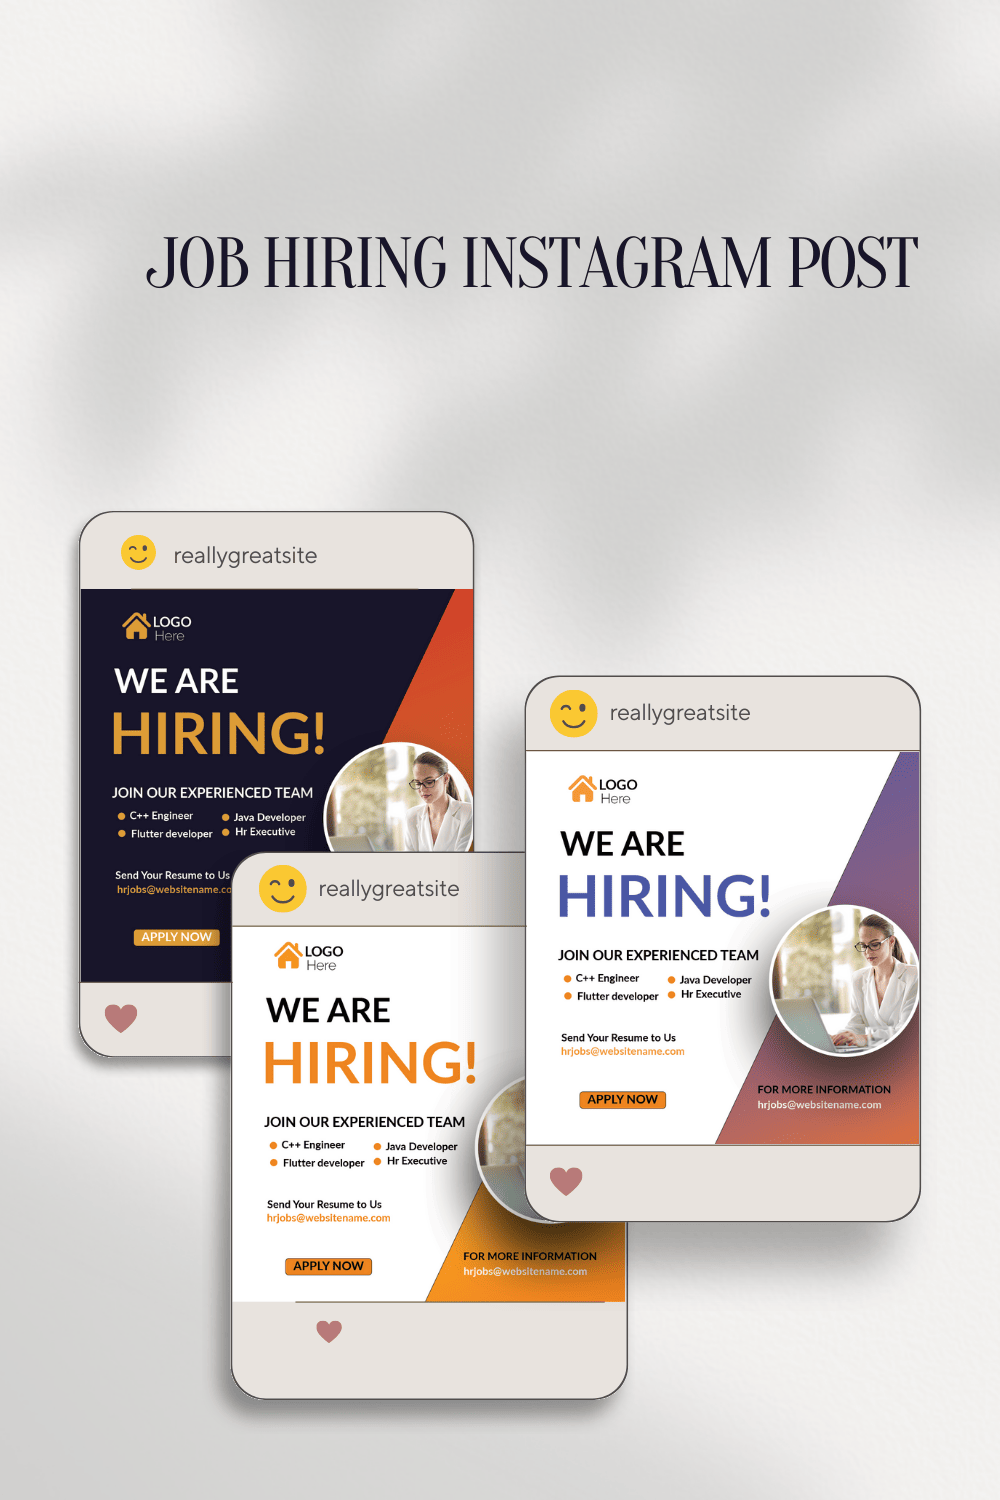 We are hiring employee job social media banner post template pinterest preview image.